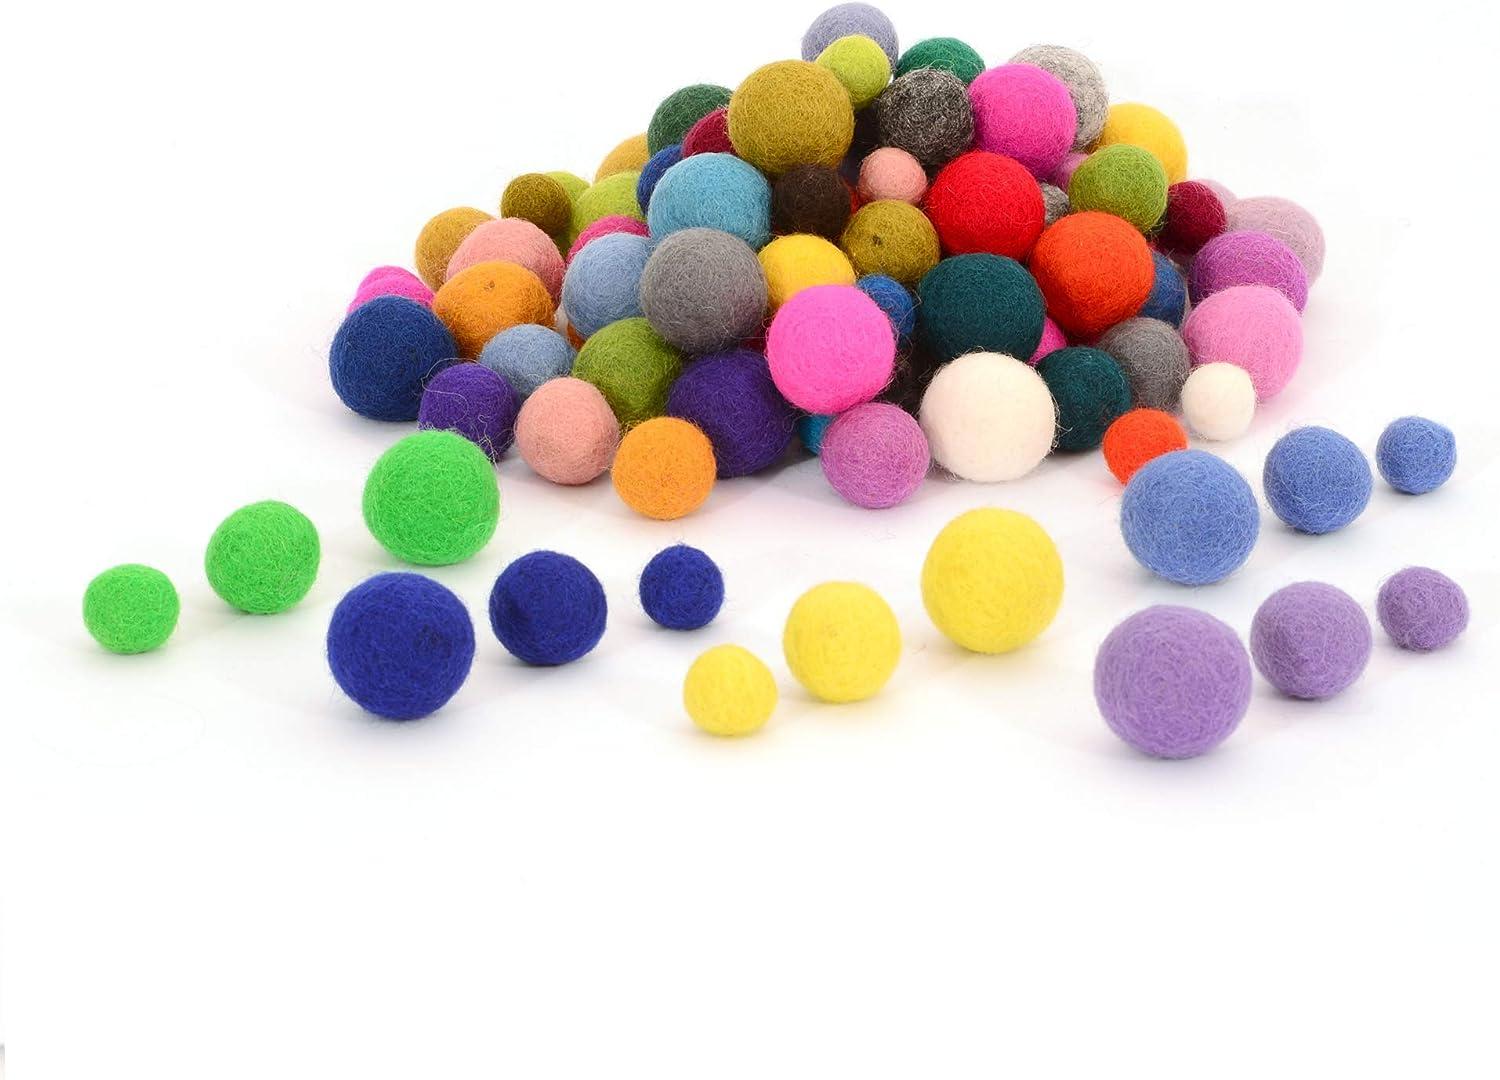 Glaciart One Felt Balls, Felt Pom Poms (10 Pieces) 4 Centimeters - 1.6  Inch, Handmade Felted 10 Colors (Red, Blue, Orange, Yellow, Green, Pink and